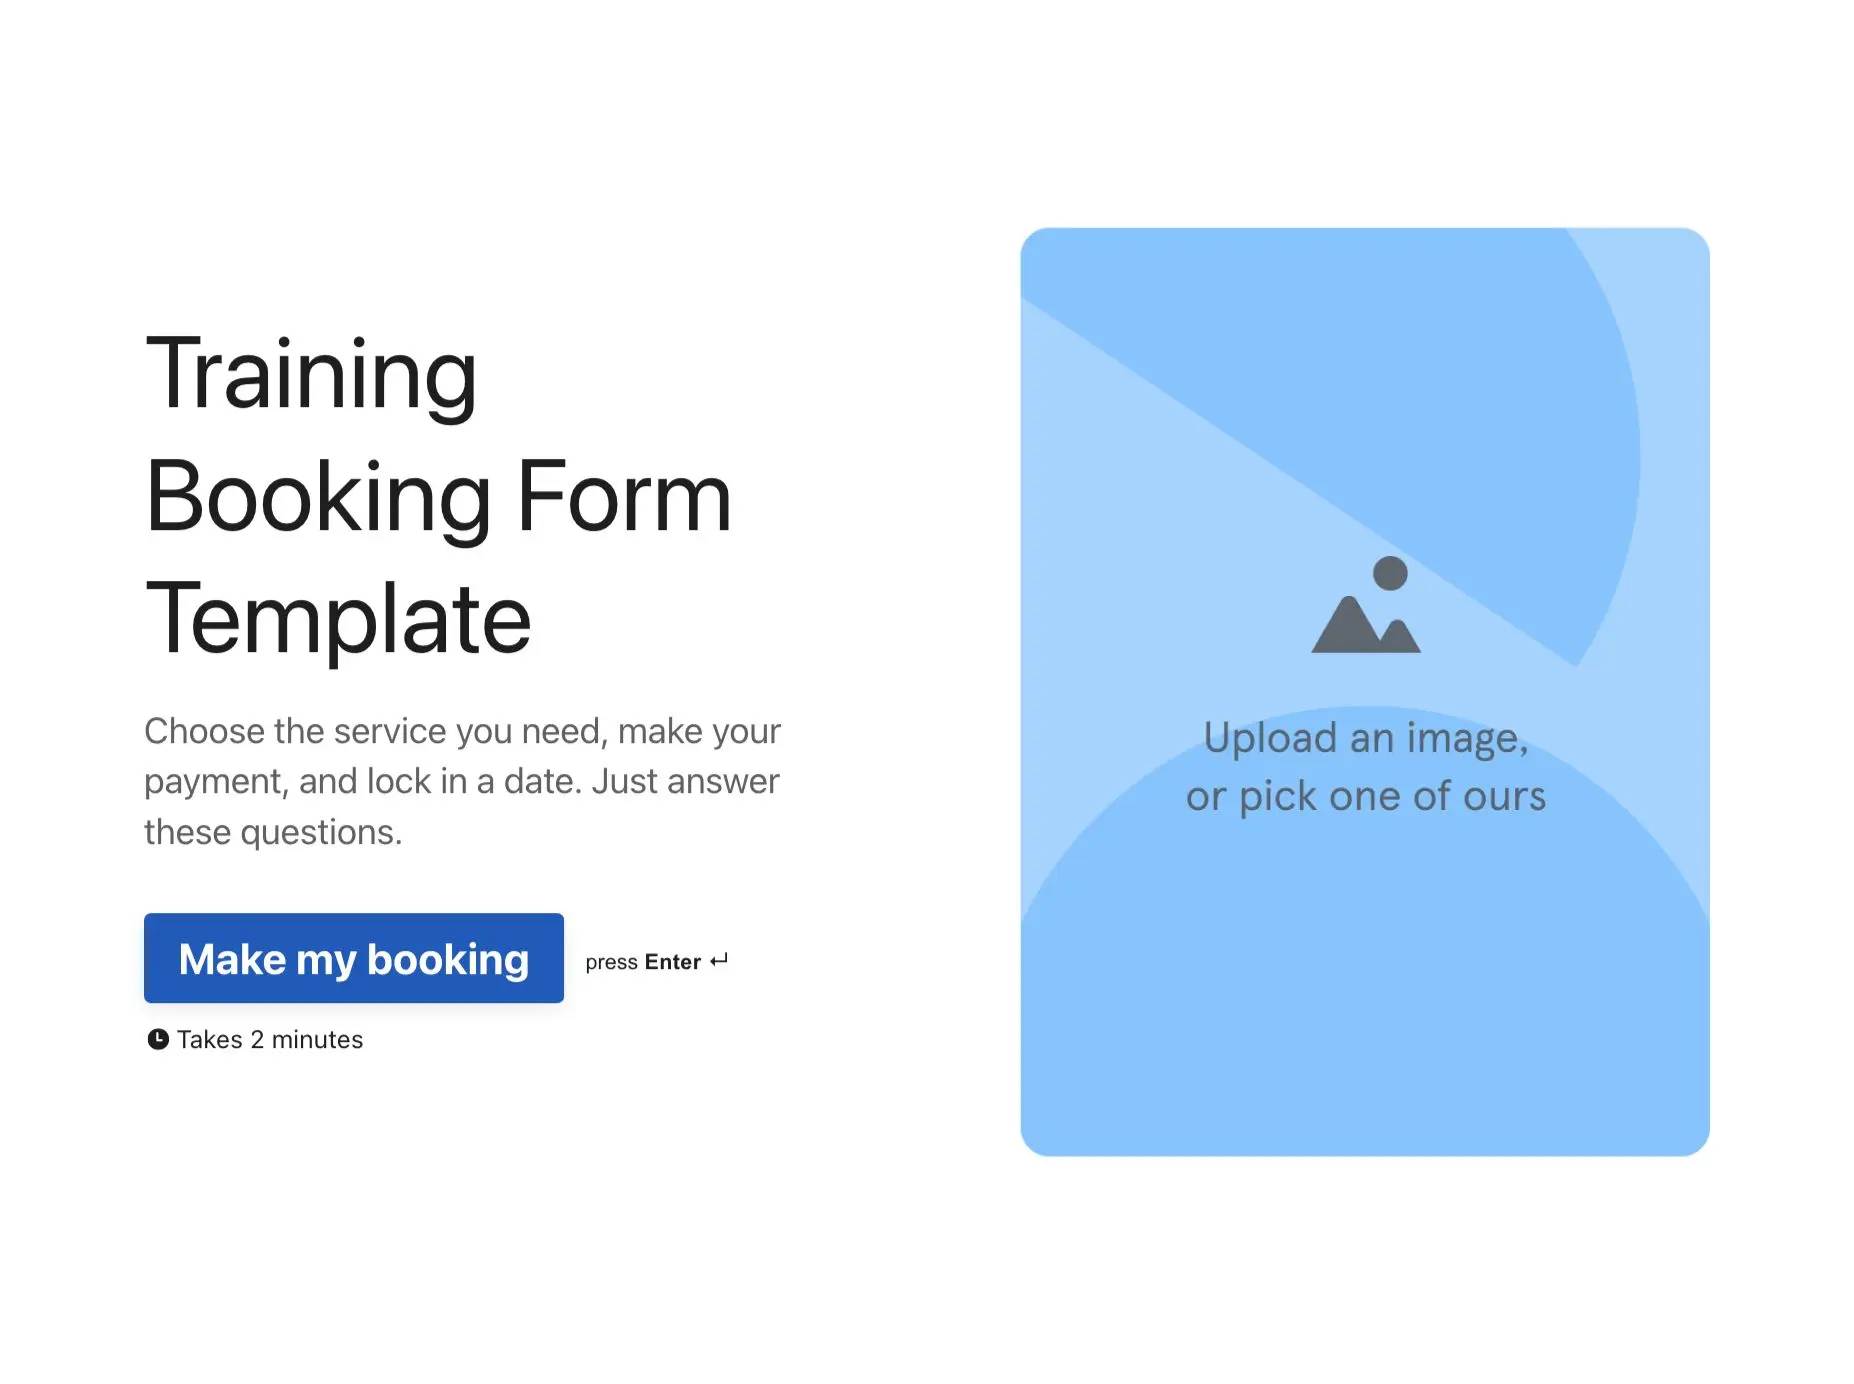 Training Booking Form Template Hero